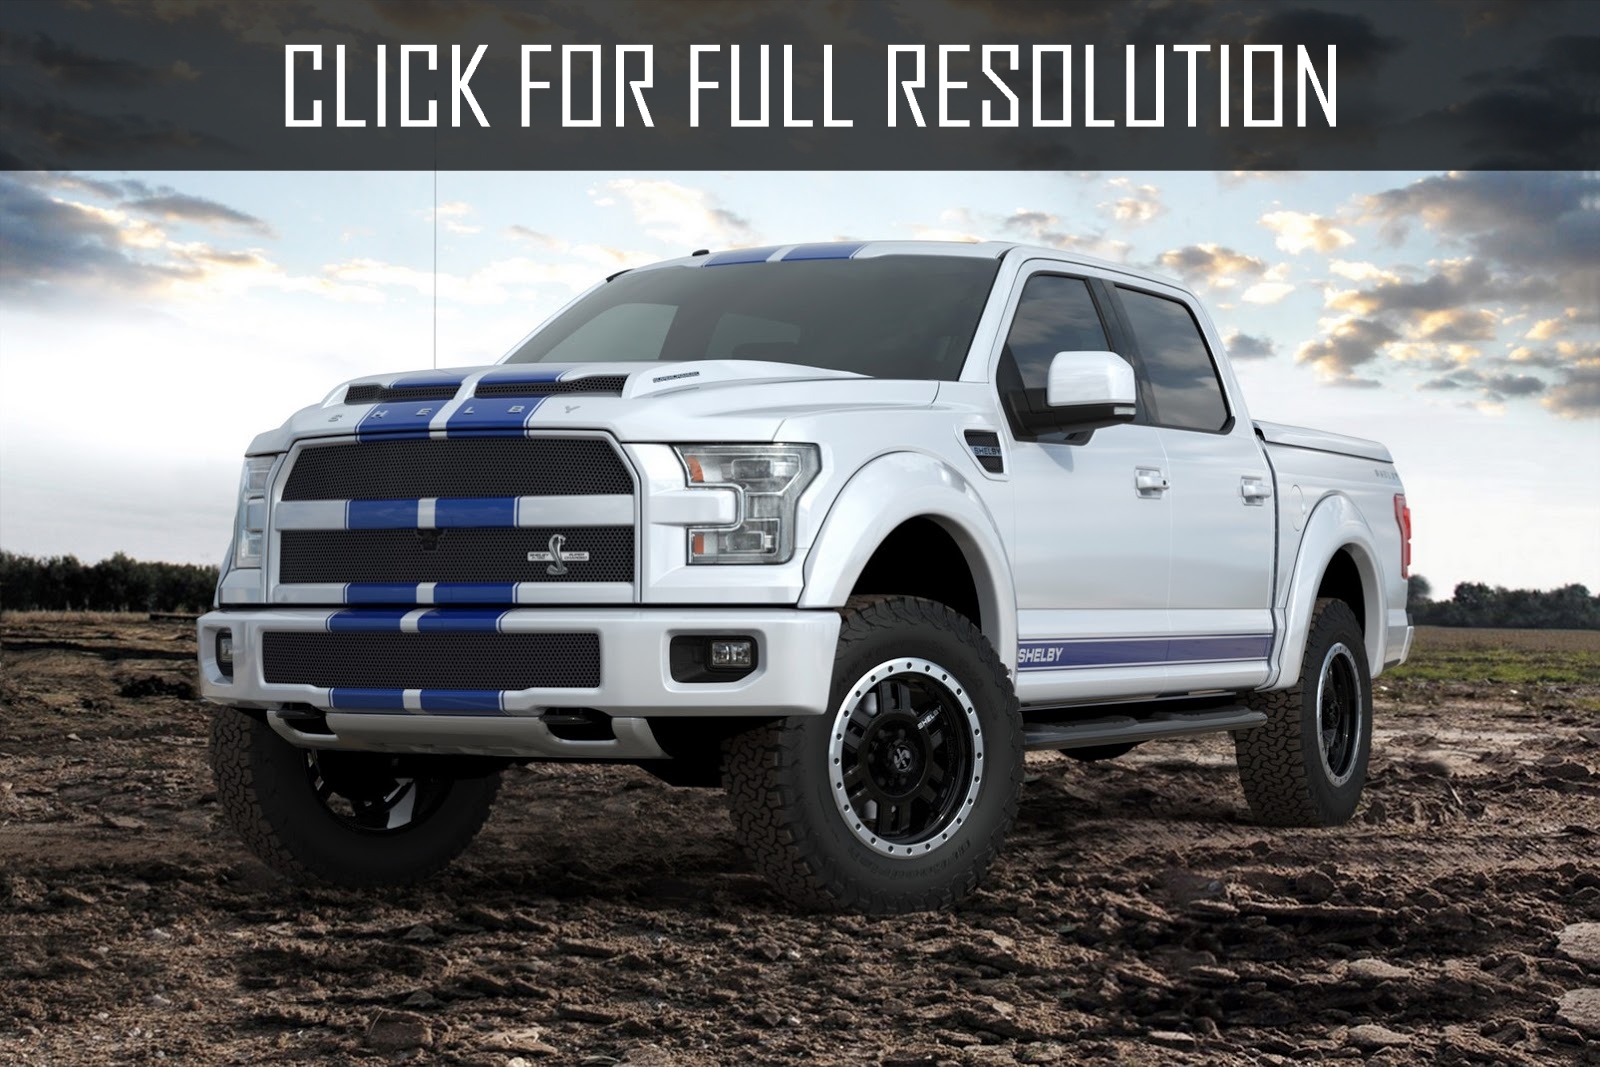 2015 Ford F-150 Shelby